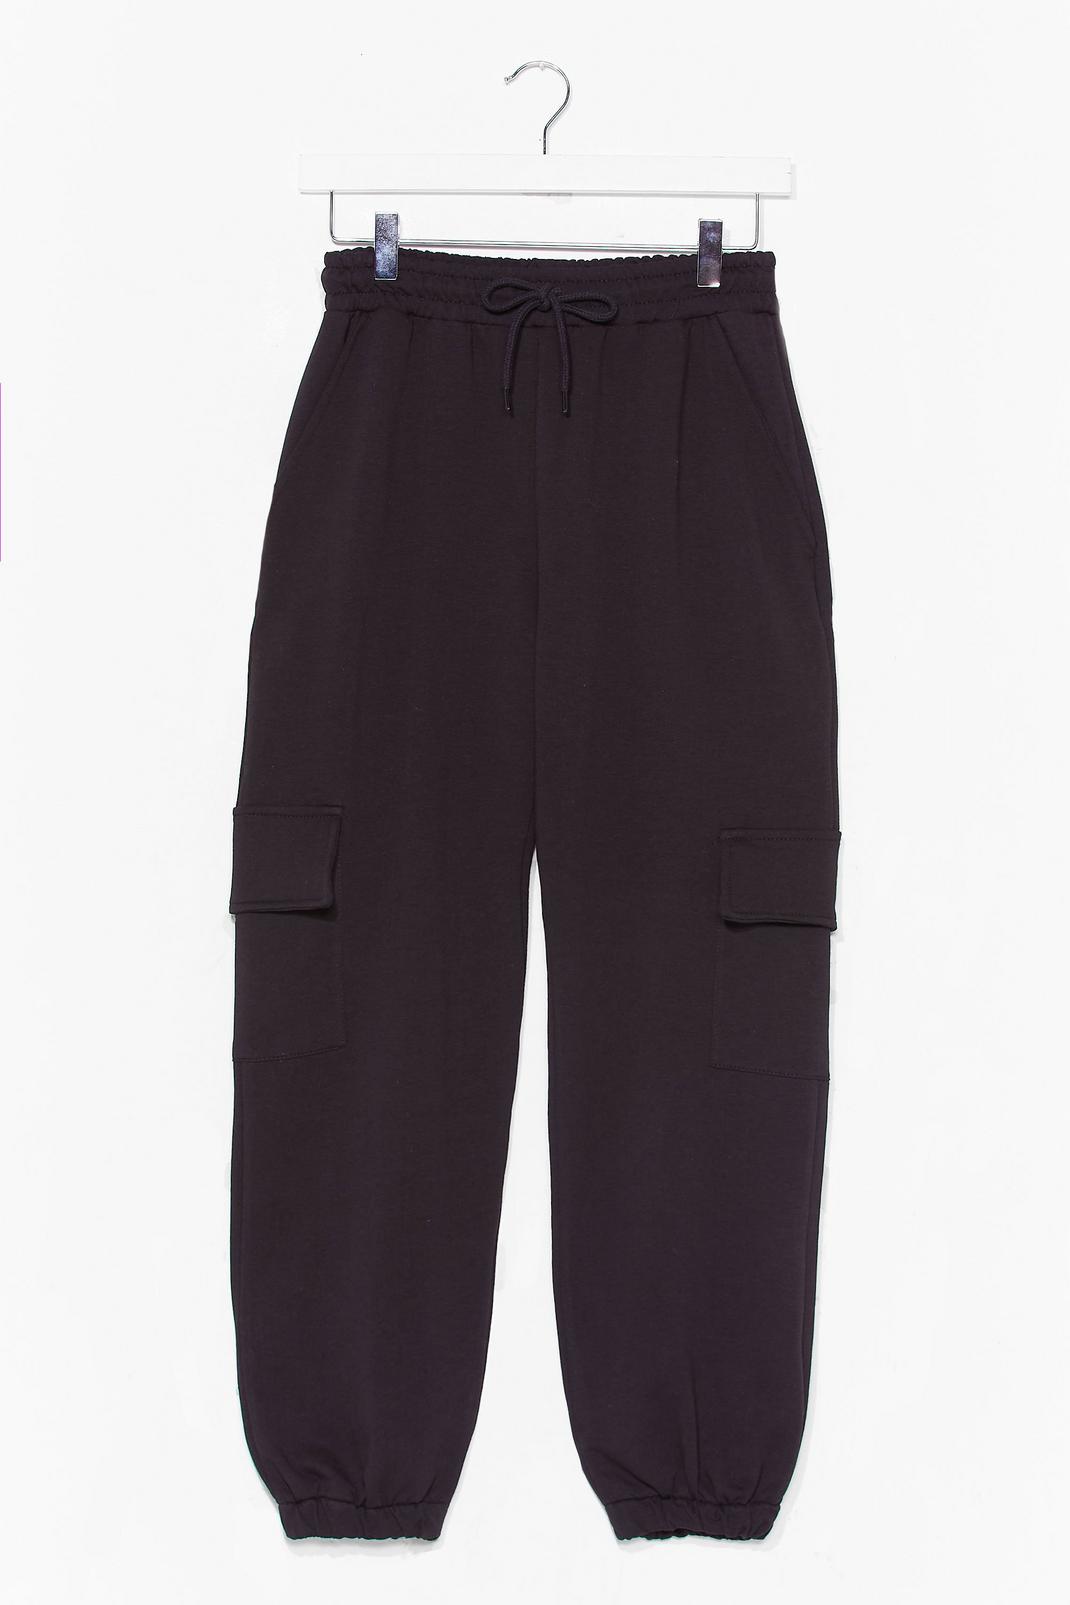 Pocket Ready to Launch Cargo Jogger Pants image number 1